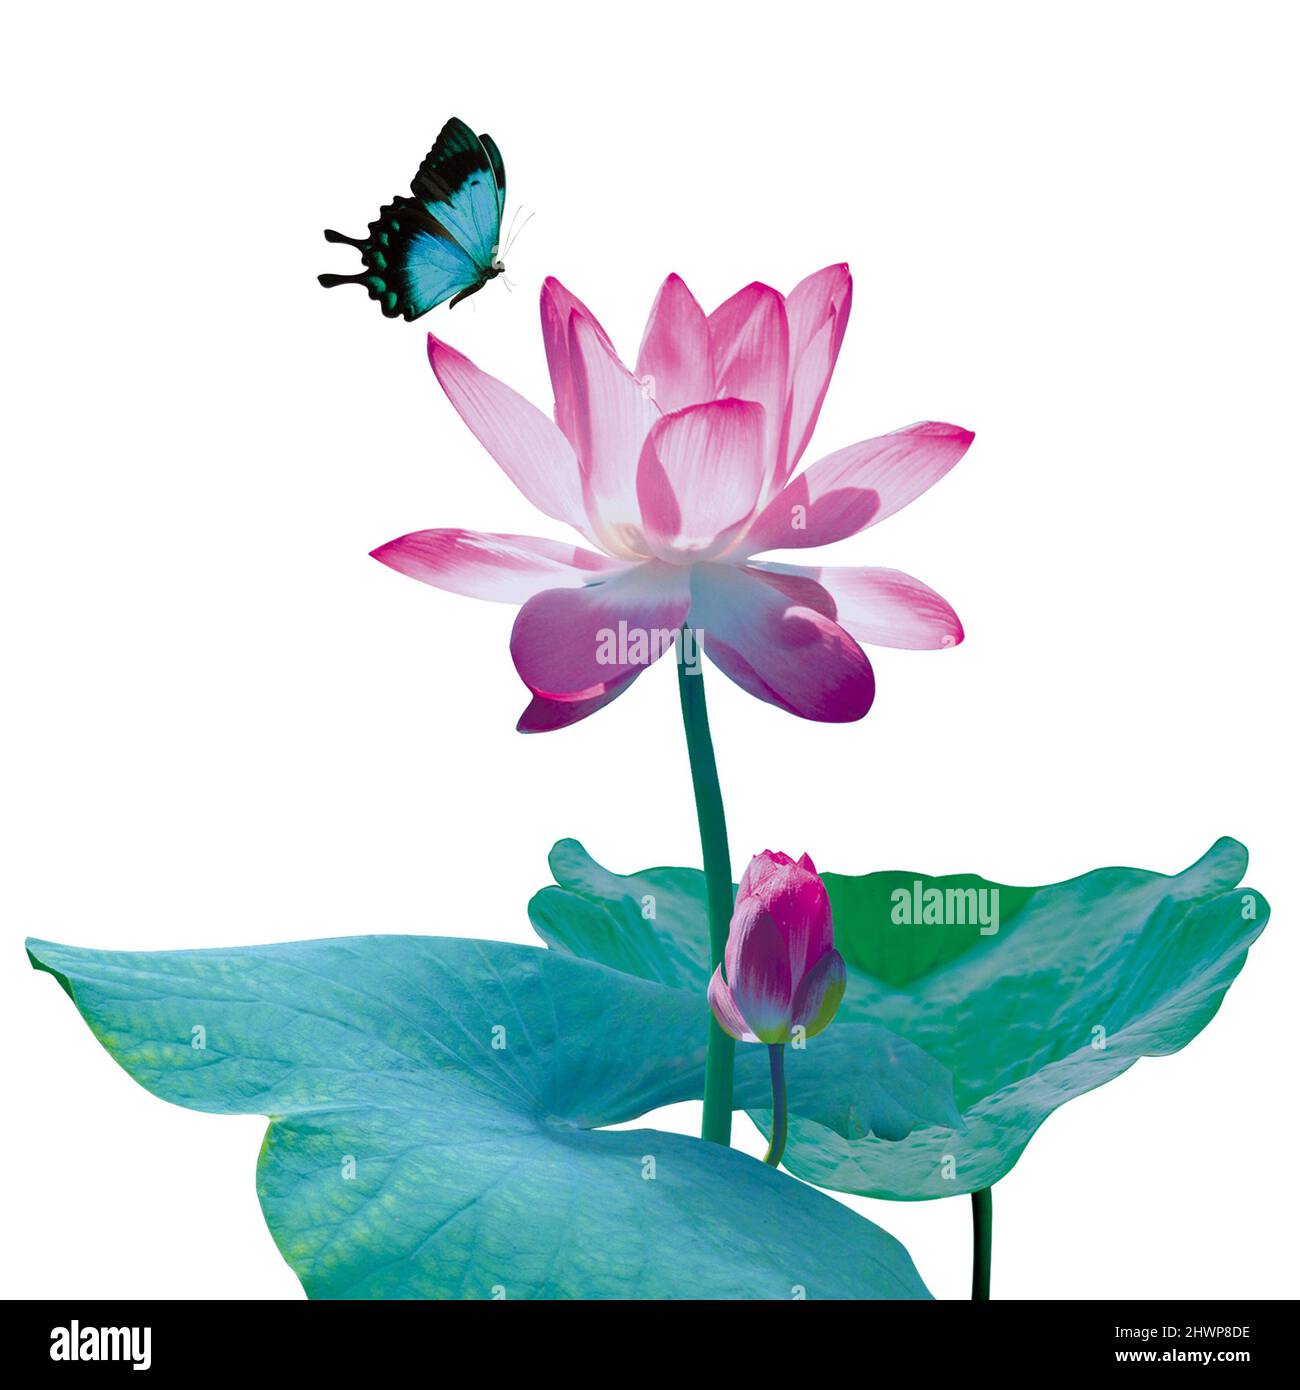 Lotus flower and butterfly on white background Stock Photo